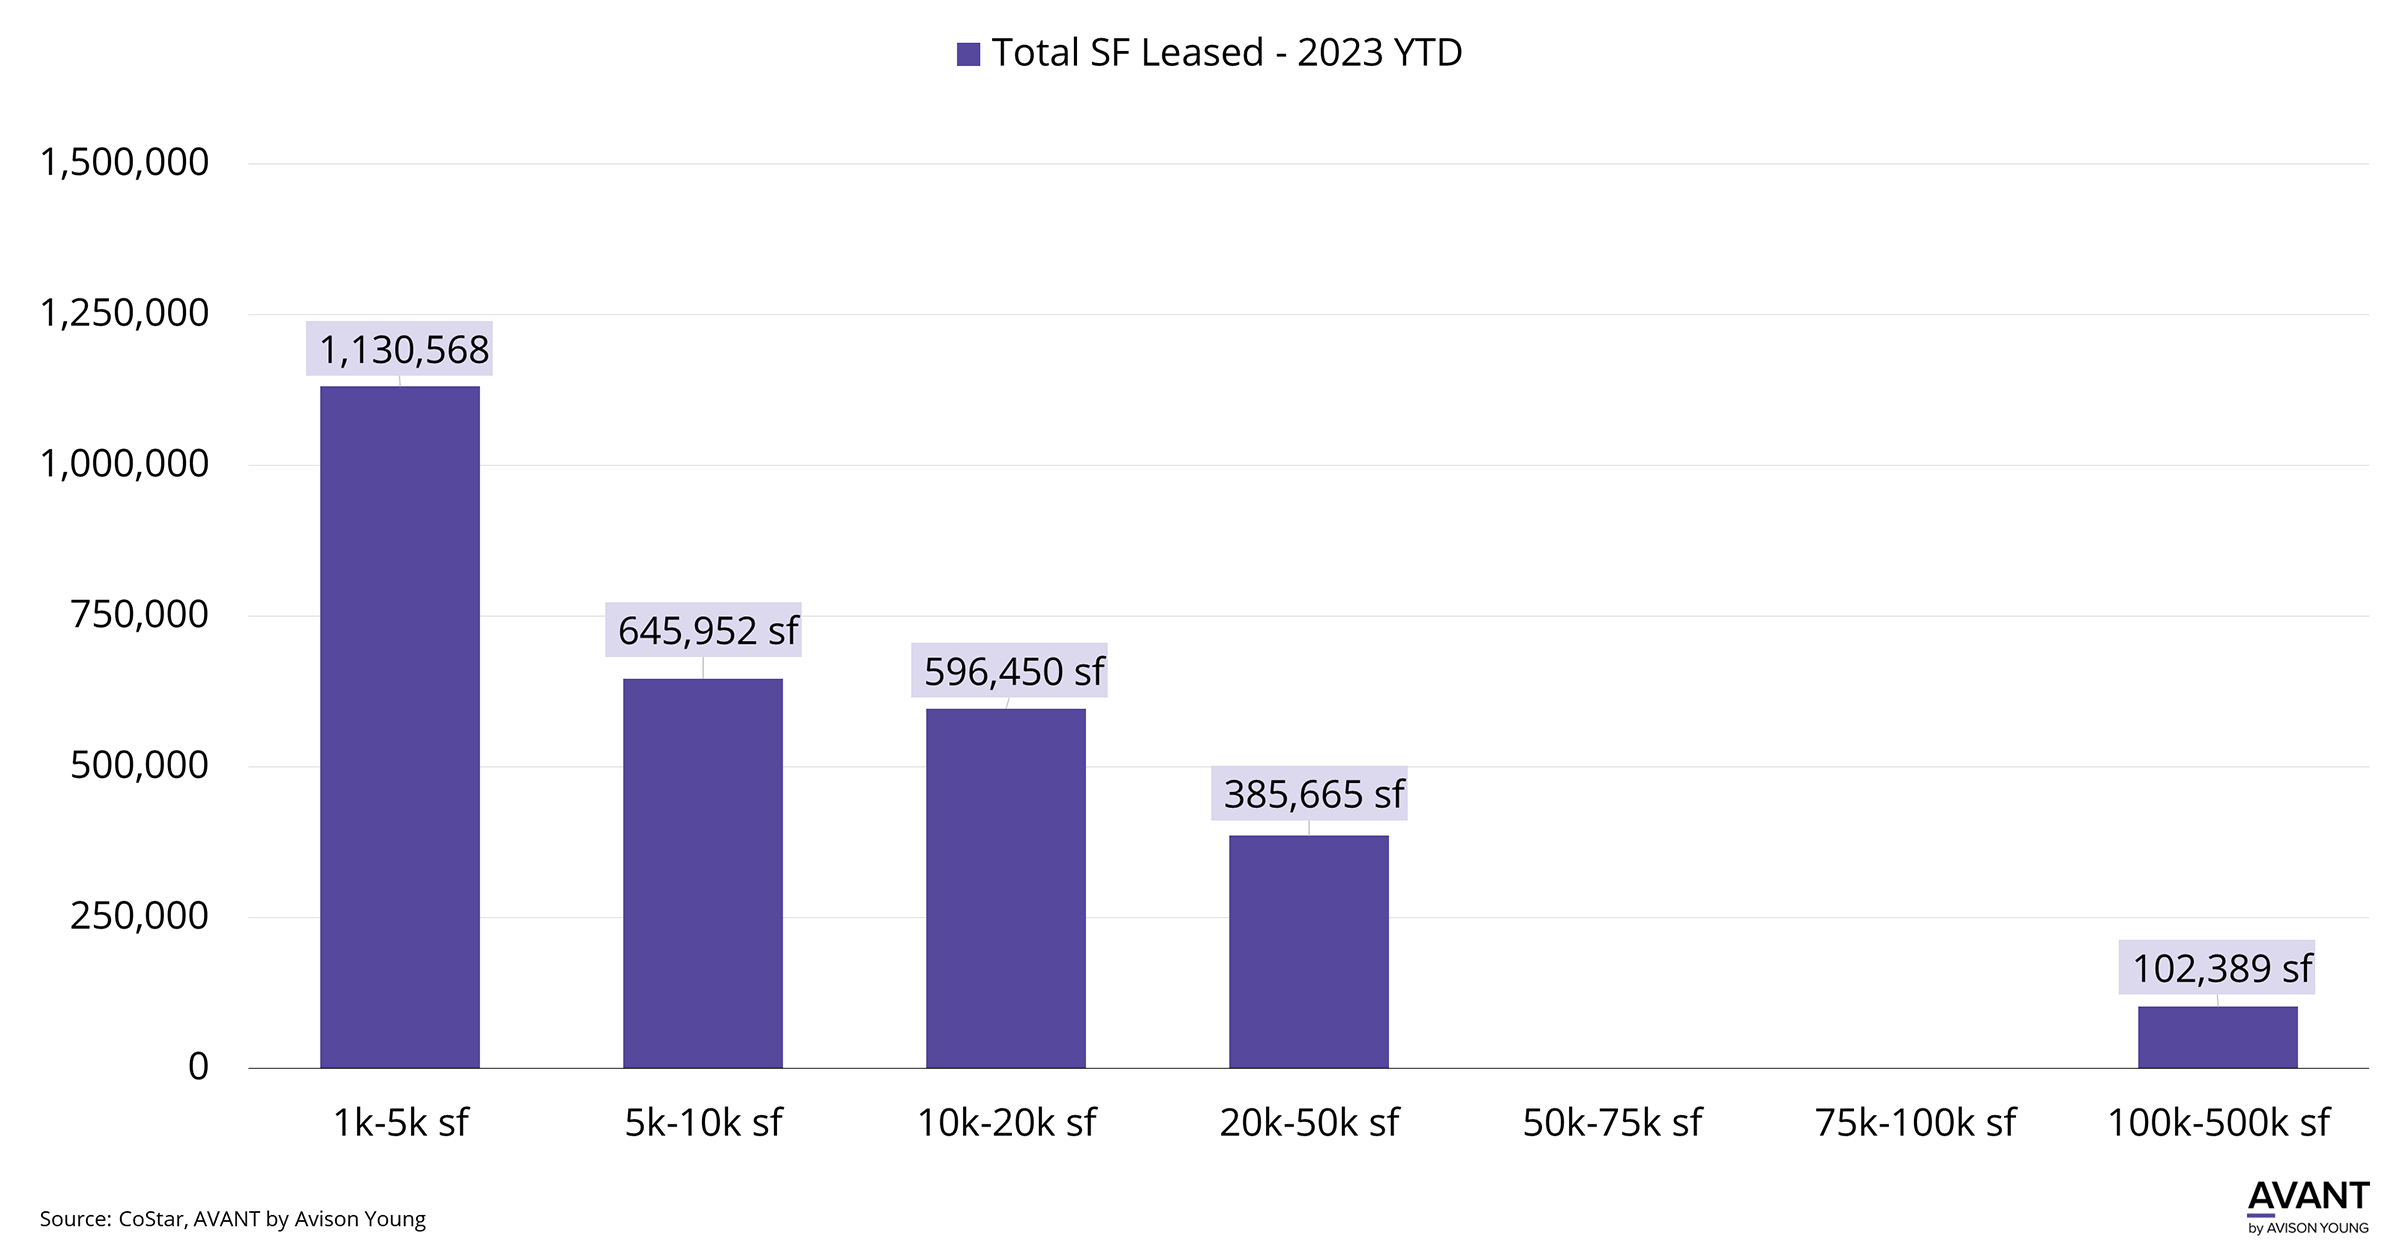 Bar chart of total sf commercial real estate space leased 2023 YTD in Austin, TX